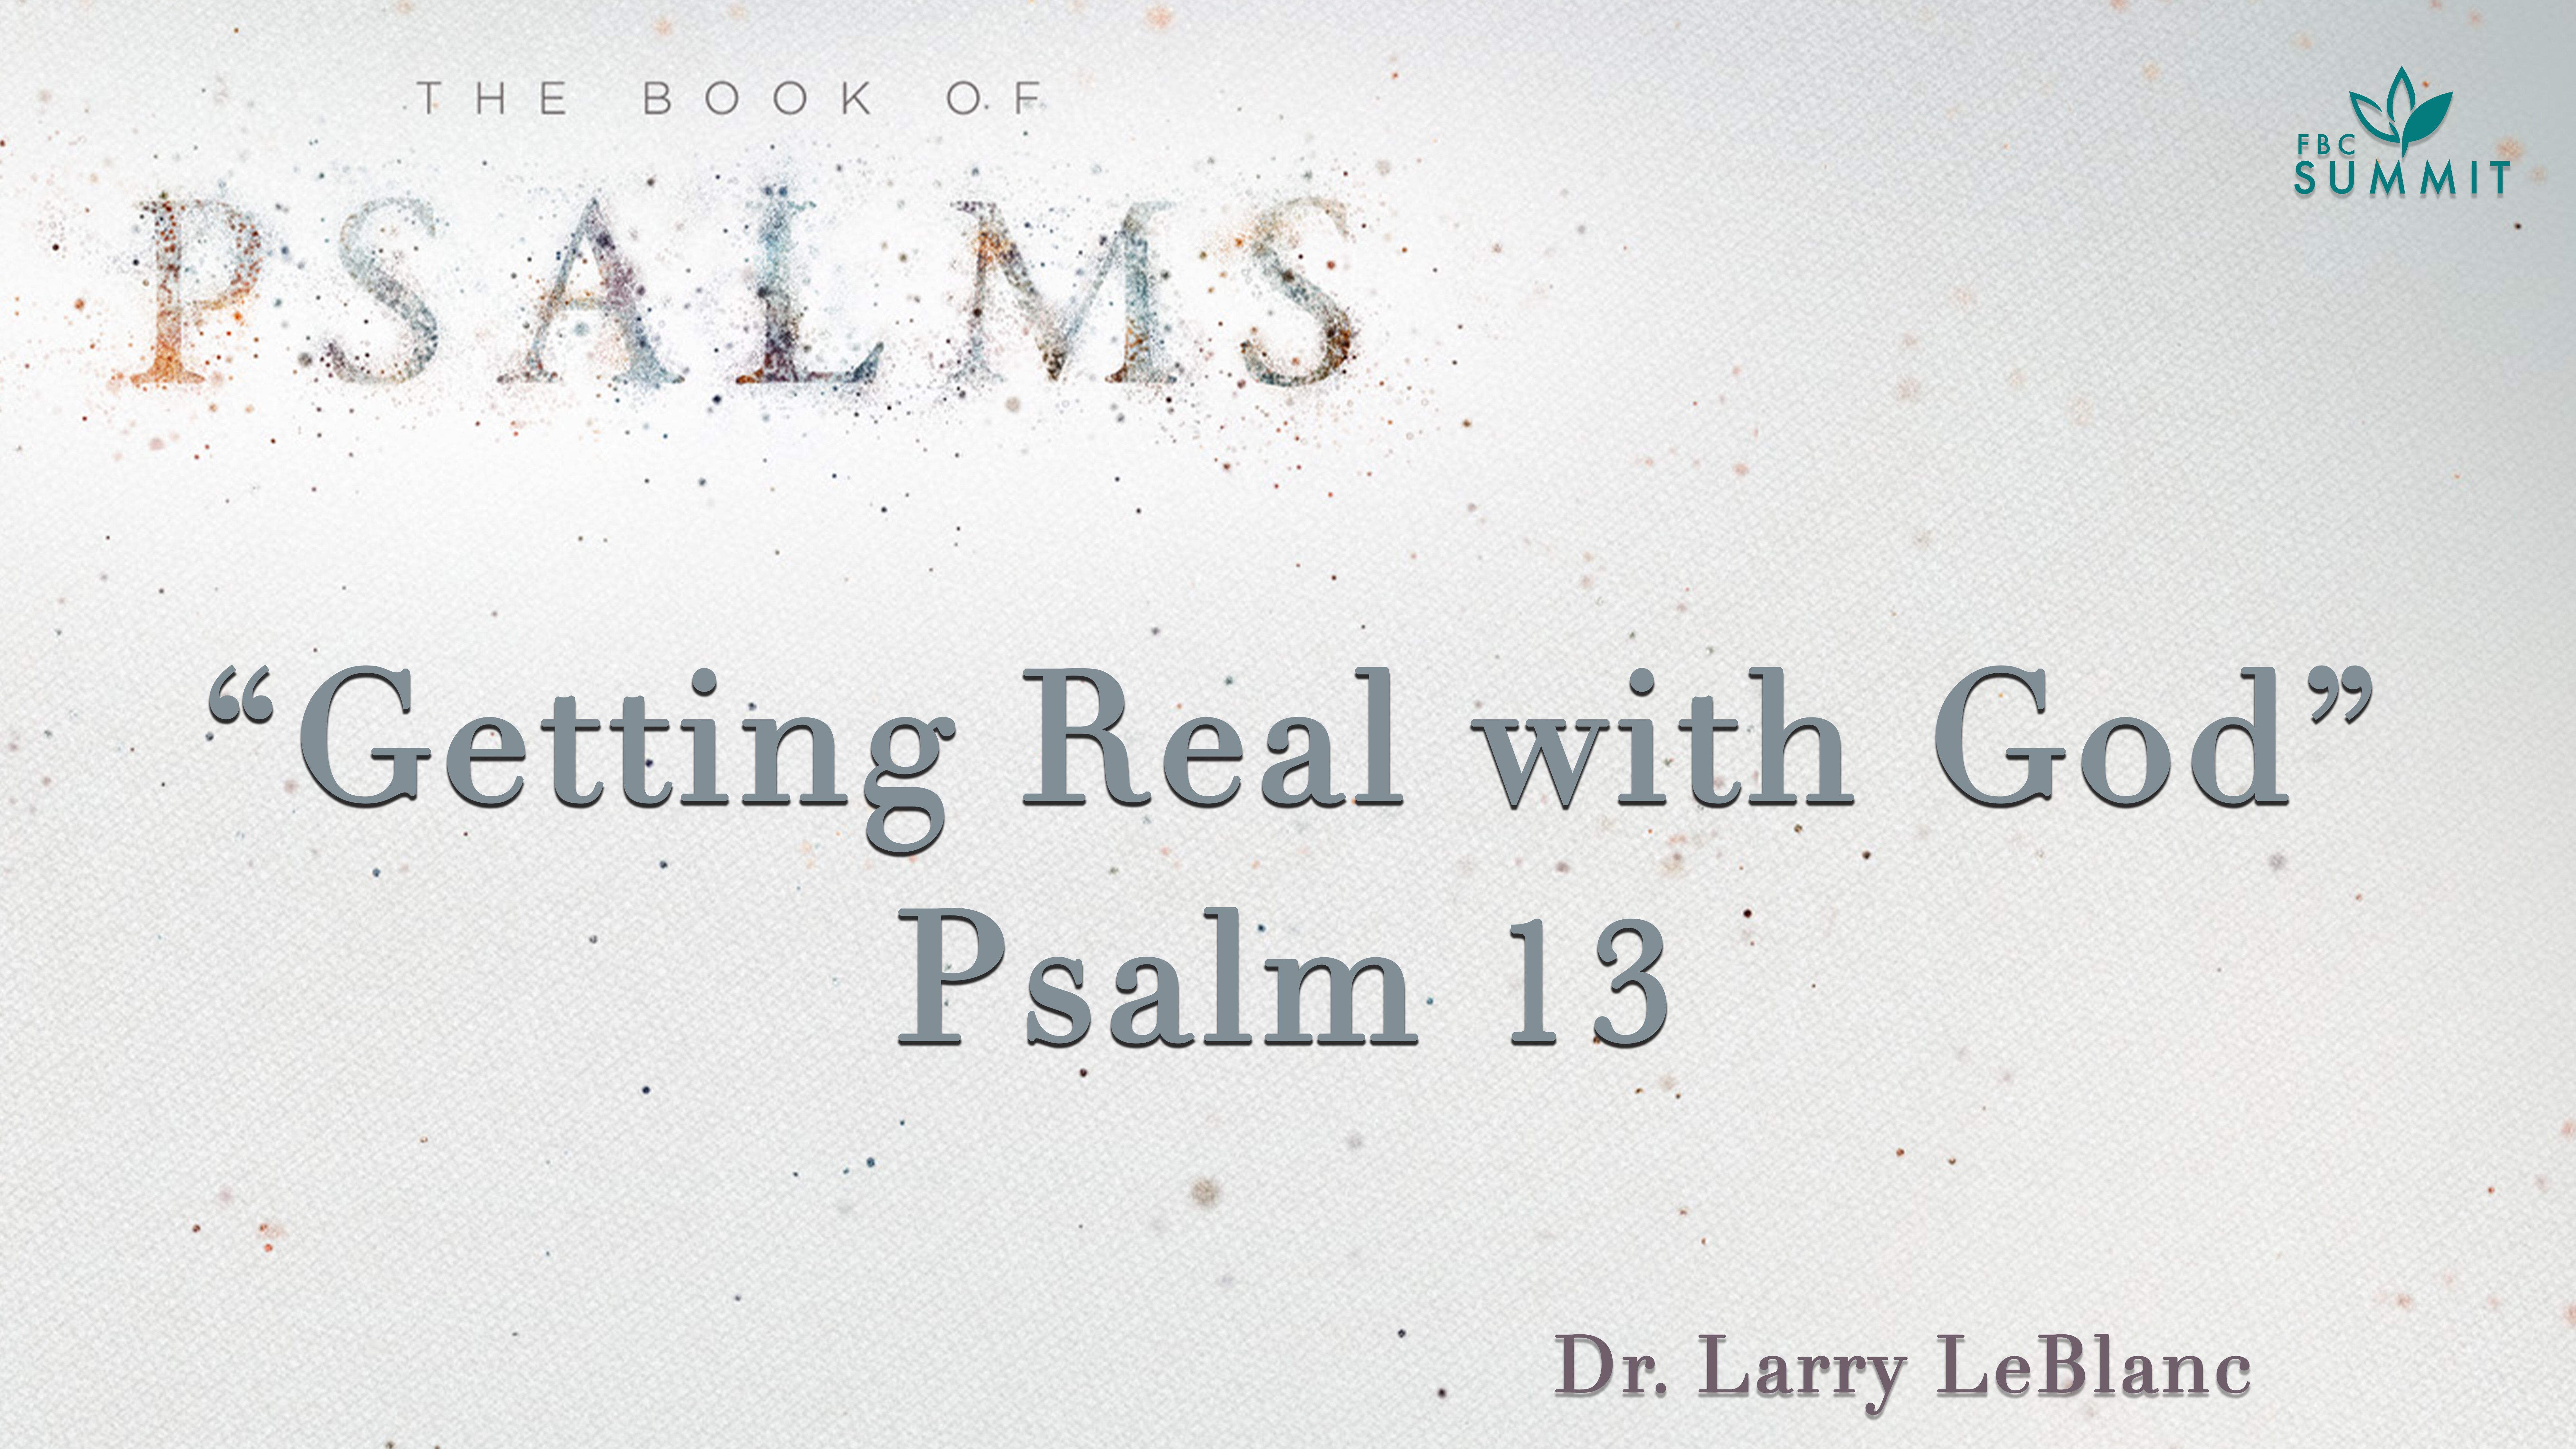 Psalm 13: Getting Real with God